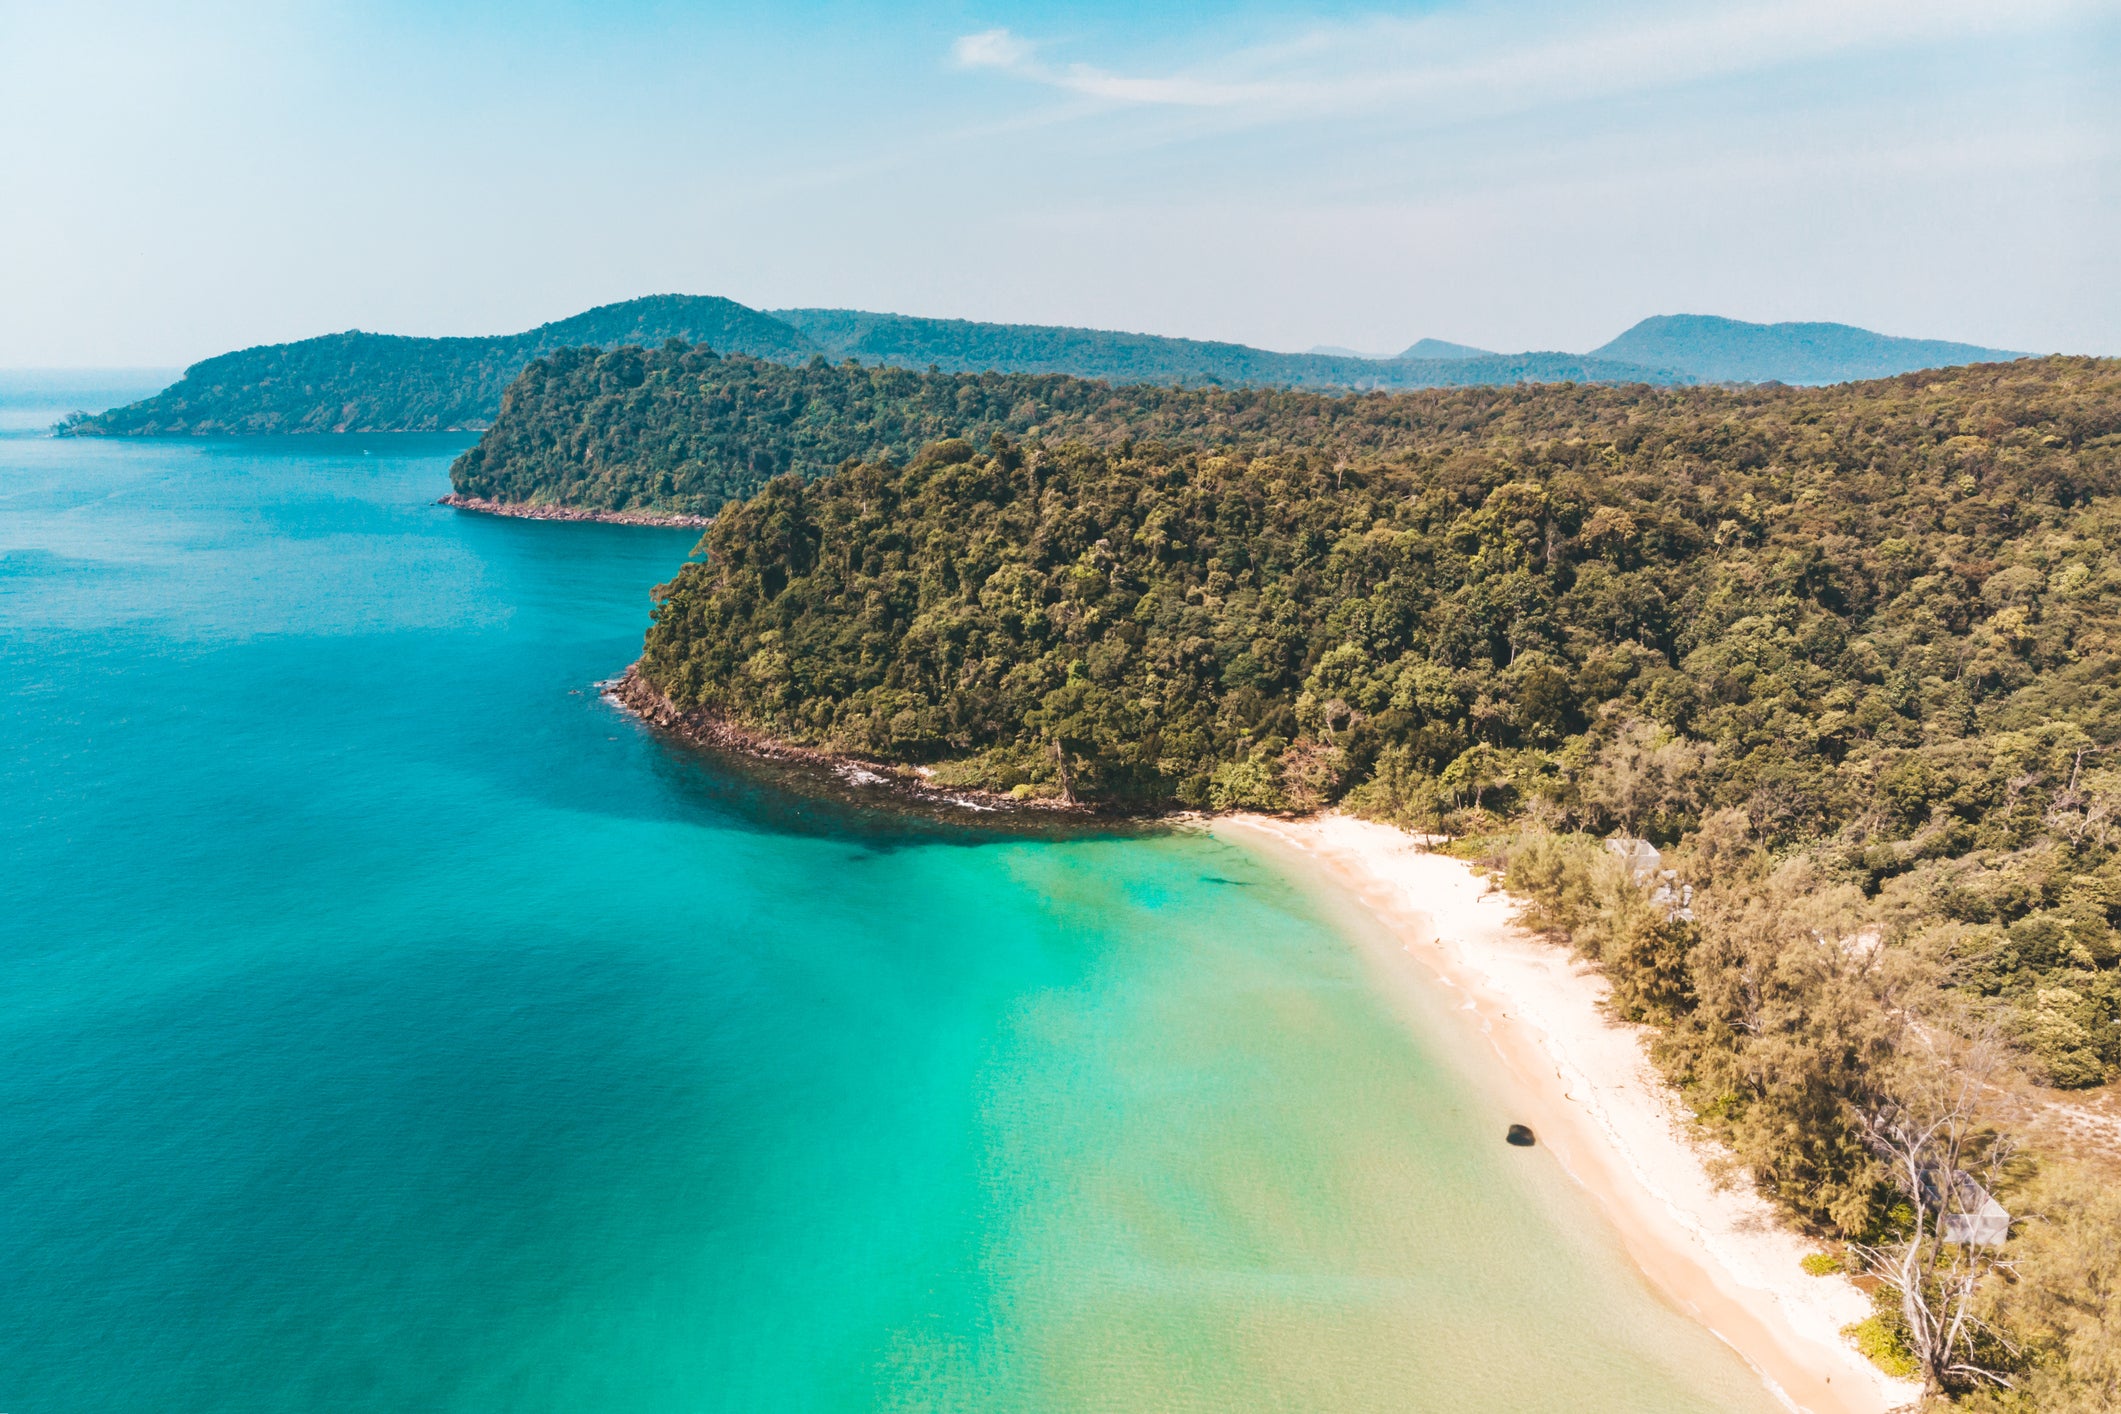 The picturesque island of Koh Rong in Cambodia